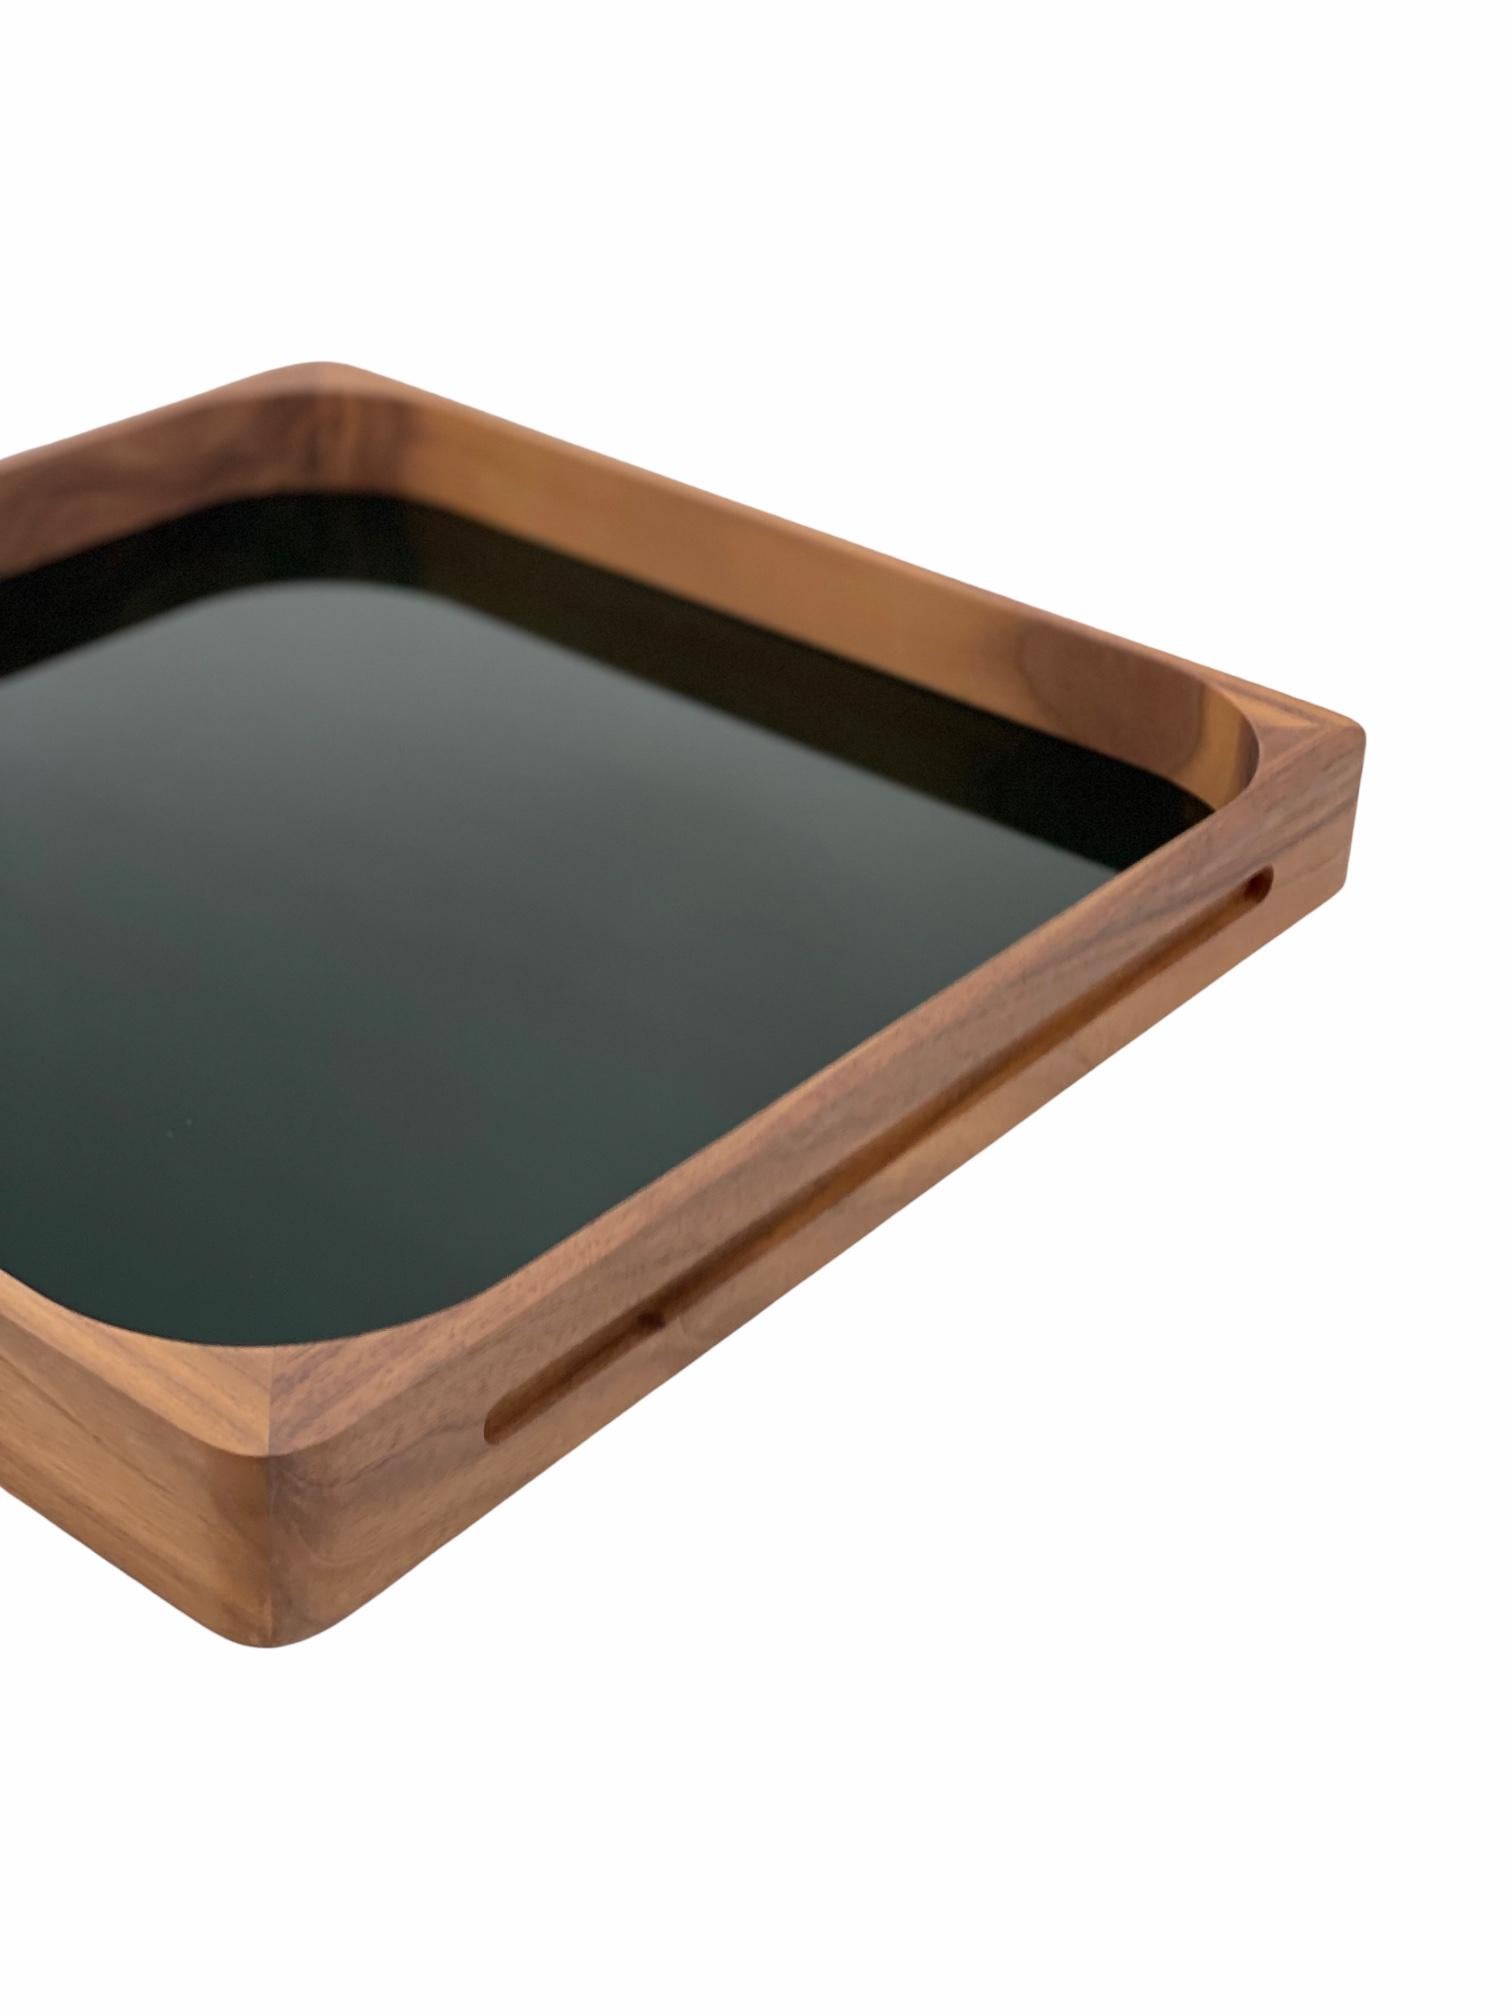 This classic, yet modern, craftsmanship based tray is made out of walnut wood and acrylic and was designed by GS in 2004. It can be used by clients as a cocktail tray as well as a very modern and practical serving tray, making it the perfect gift.